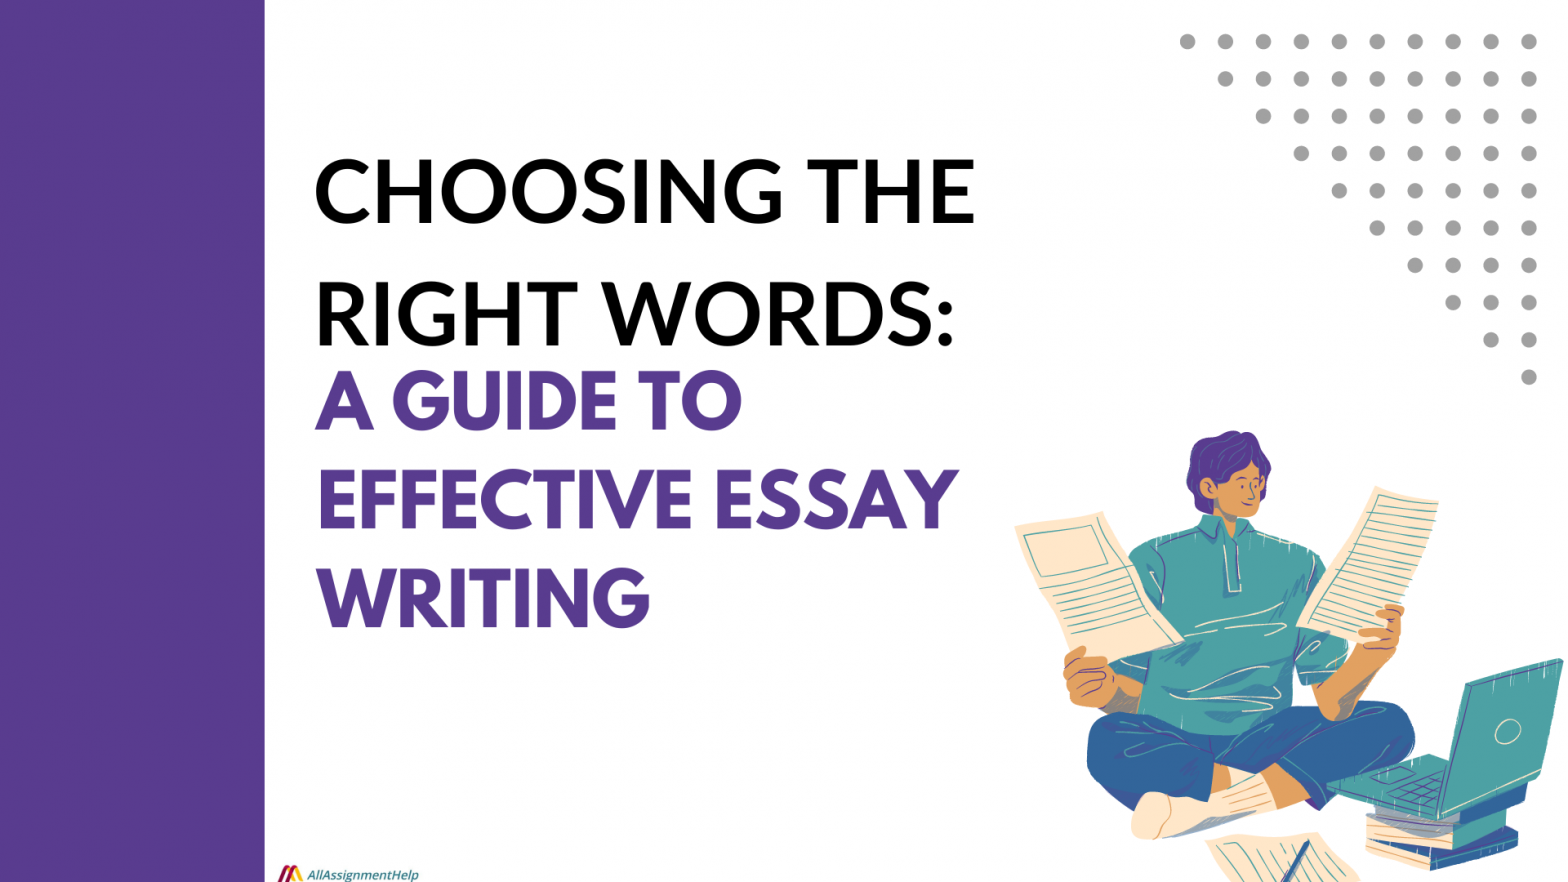 Choosing the Right Words: A Guide to Effective Essay Writing